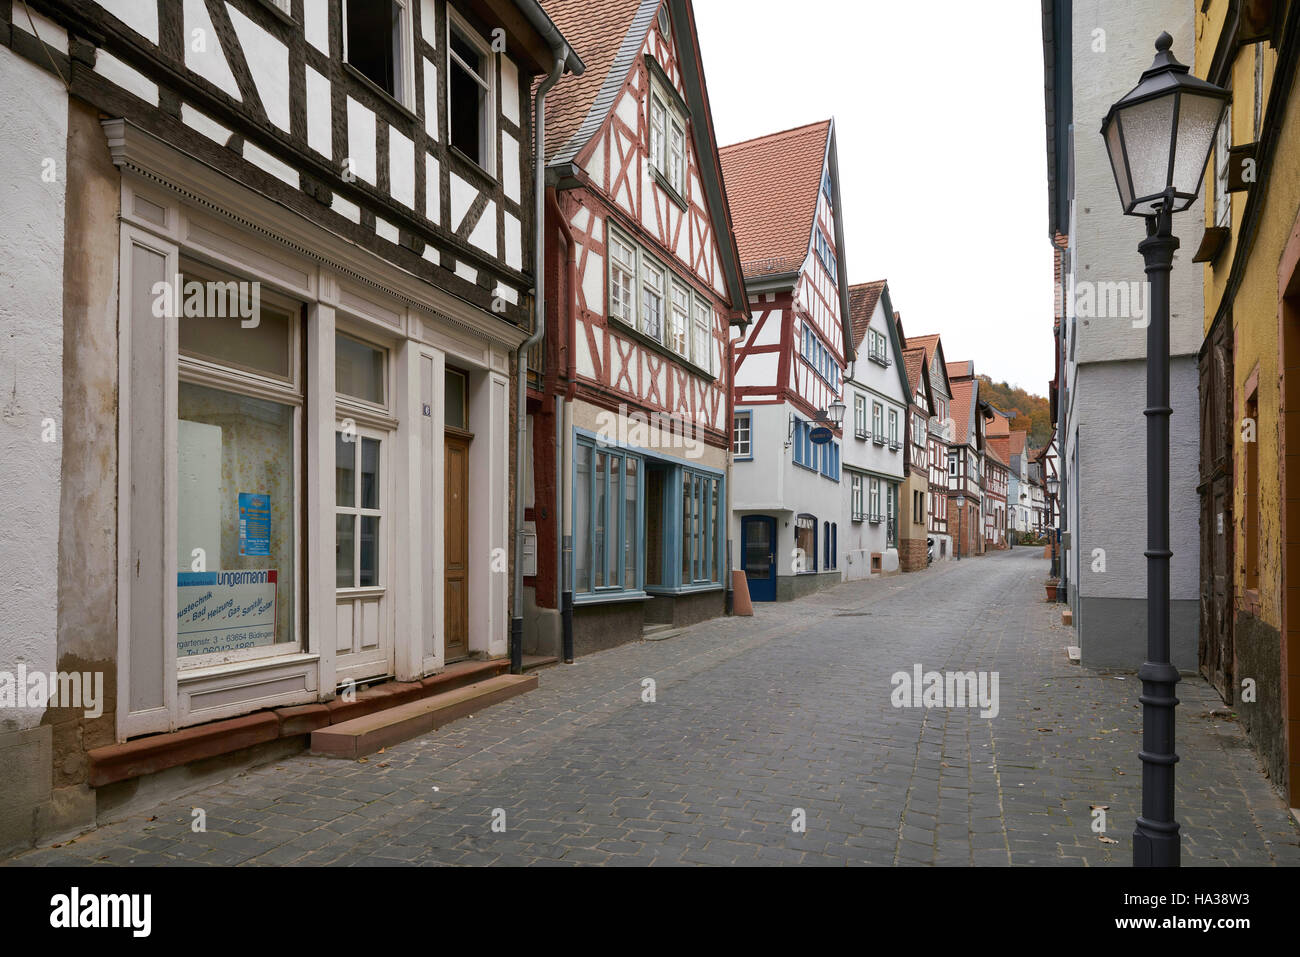 Medieval walled city of Büdingen Germany Stock Photo